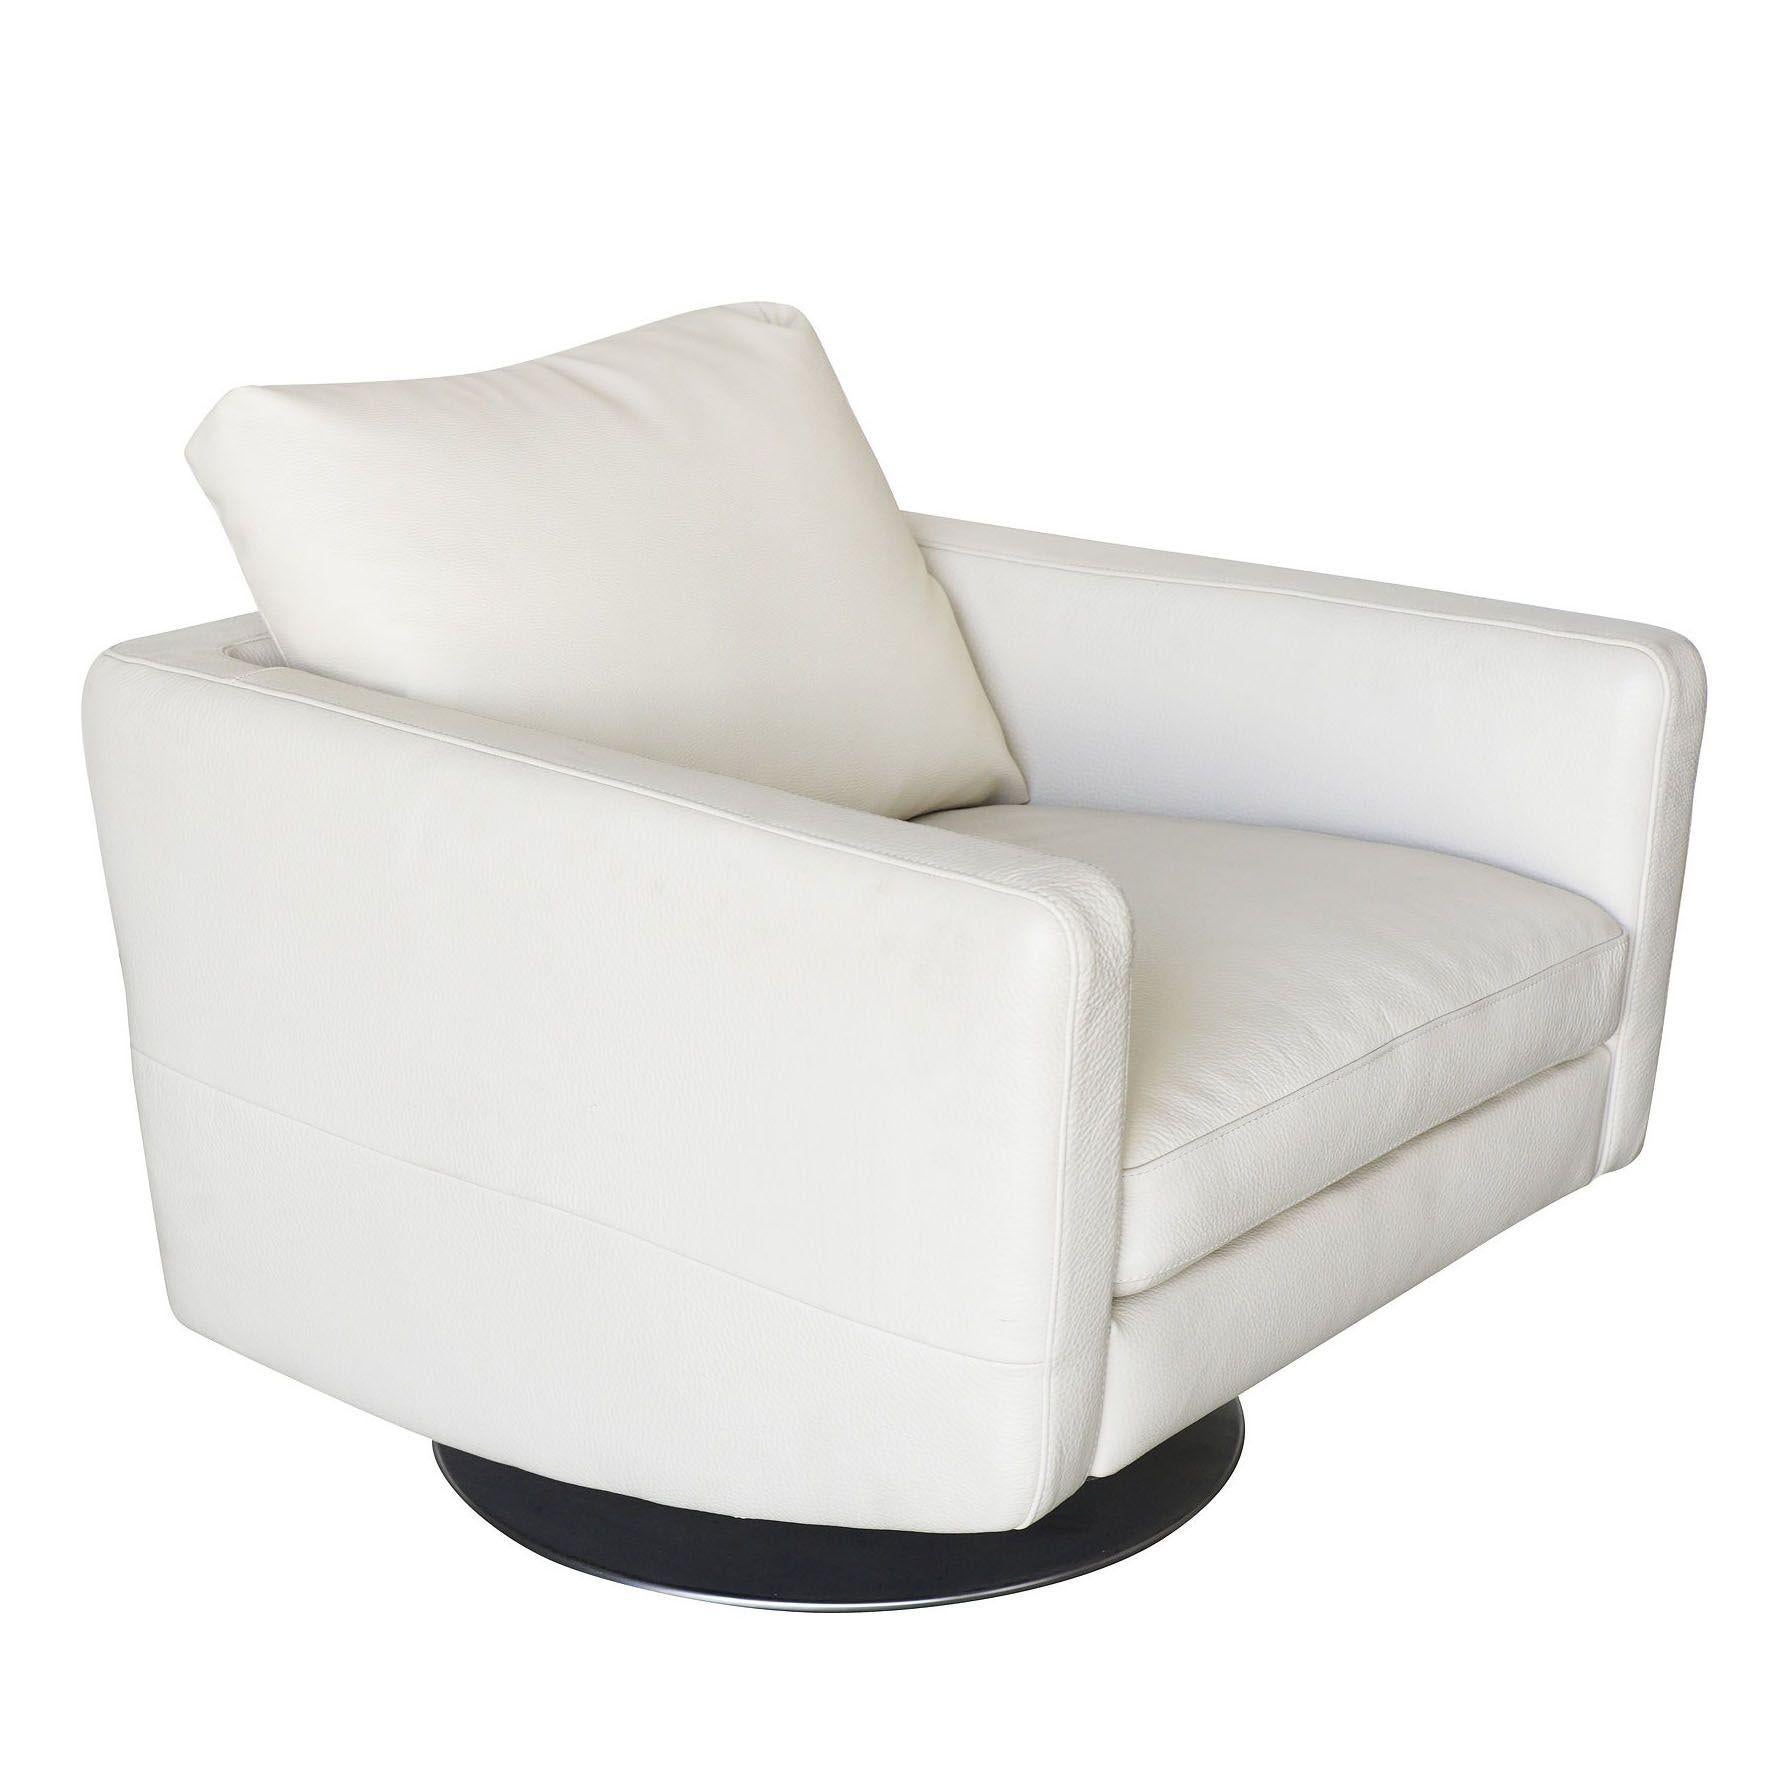 Modernist white swivel lounge chair with brush steel base and heavy vinyl covers by Permaguard.

Avalible: Two.